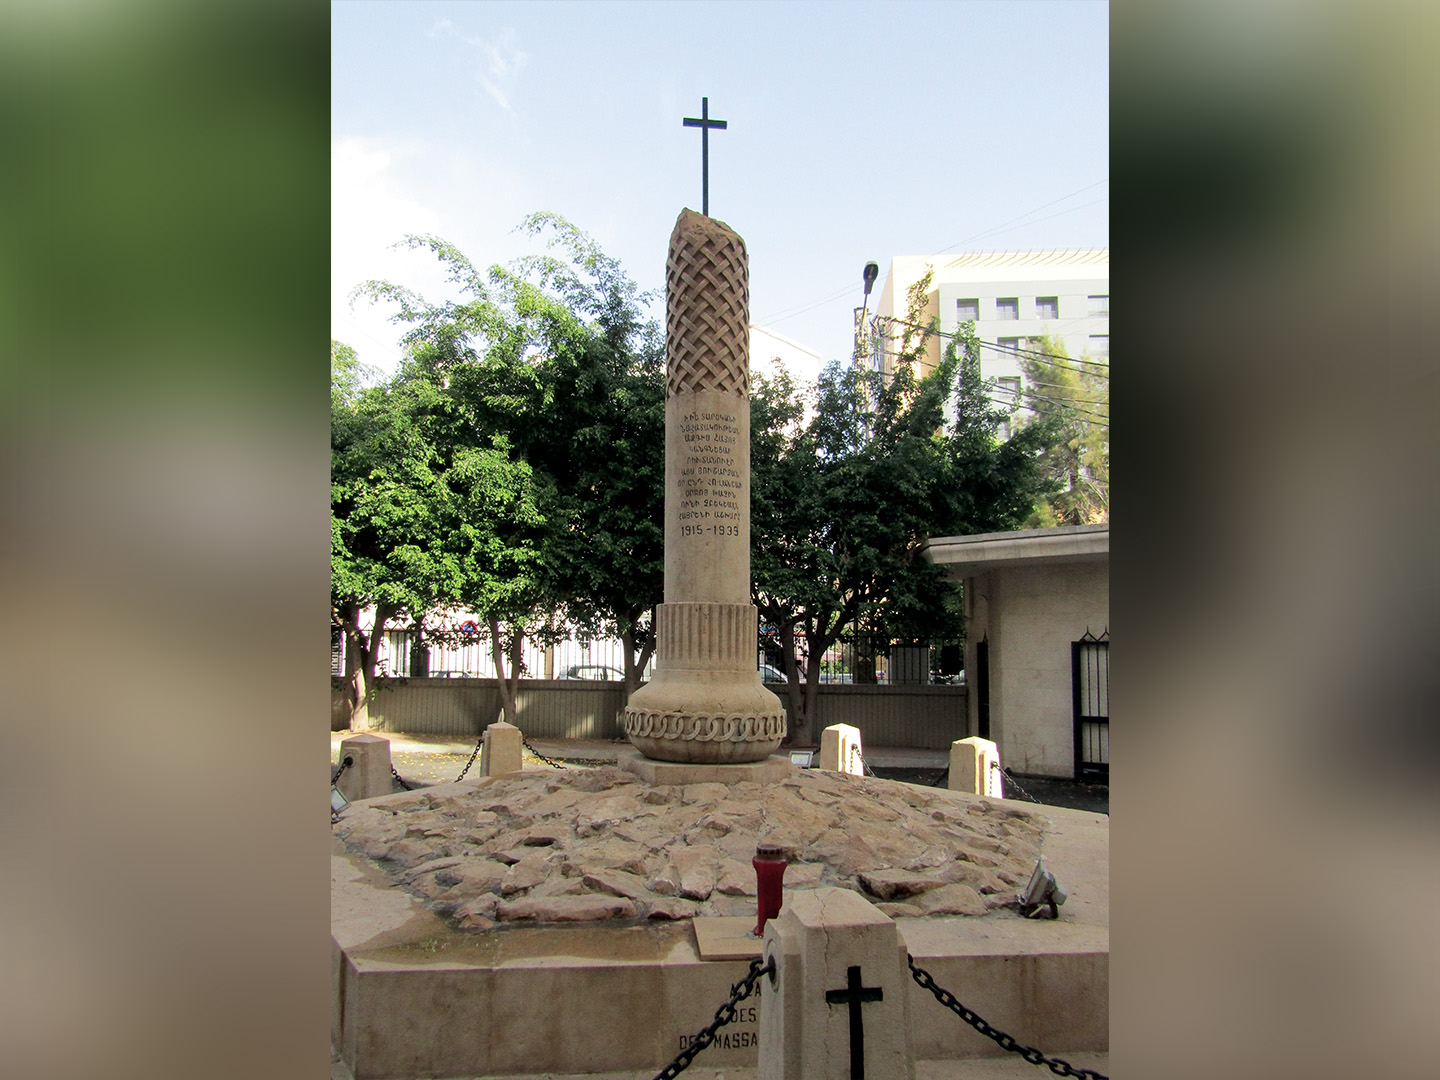 The Genocide monument erected in 1931 in the courtyard of the Armenian Catholic Patriarchate in Beirut.